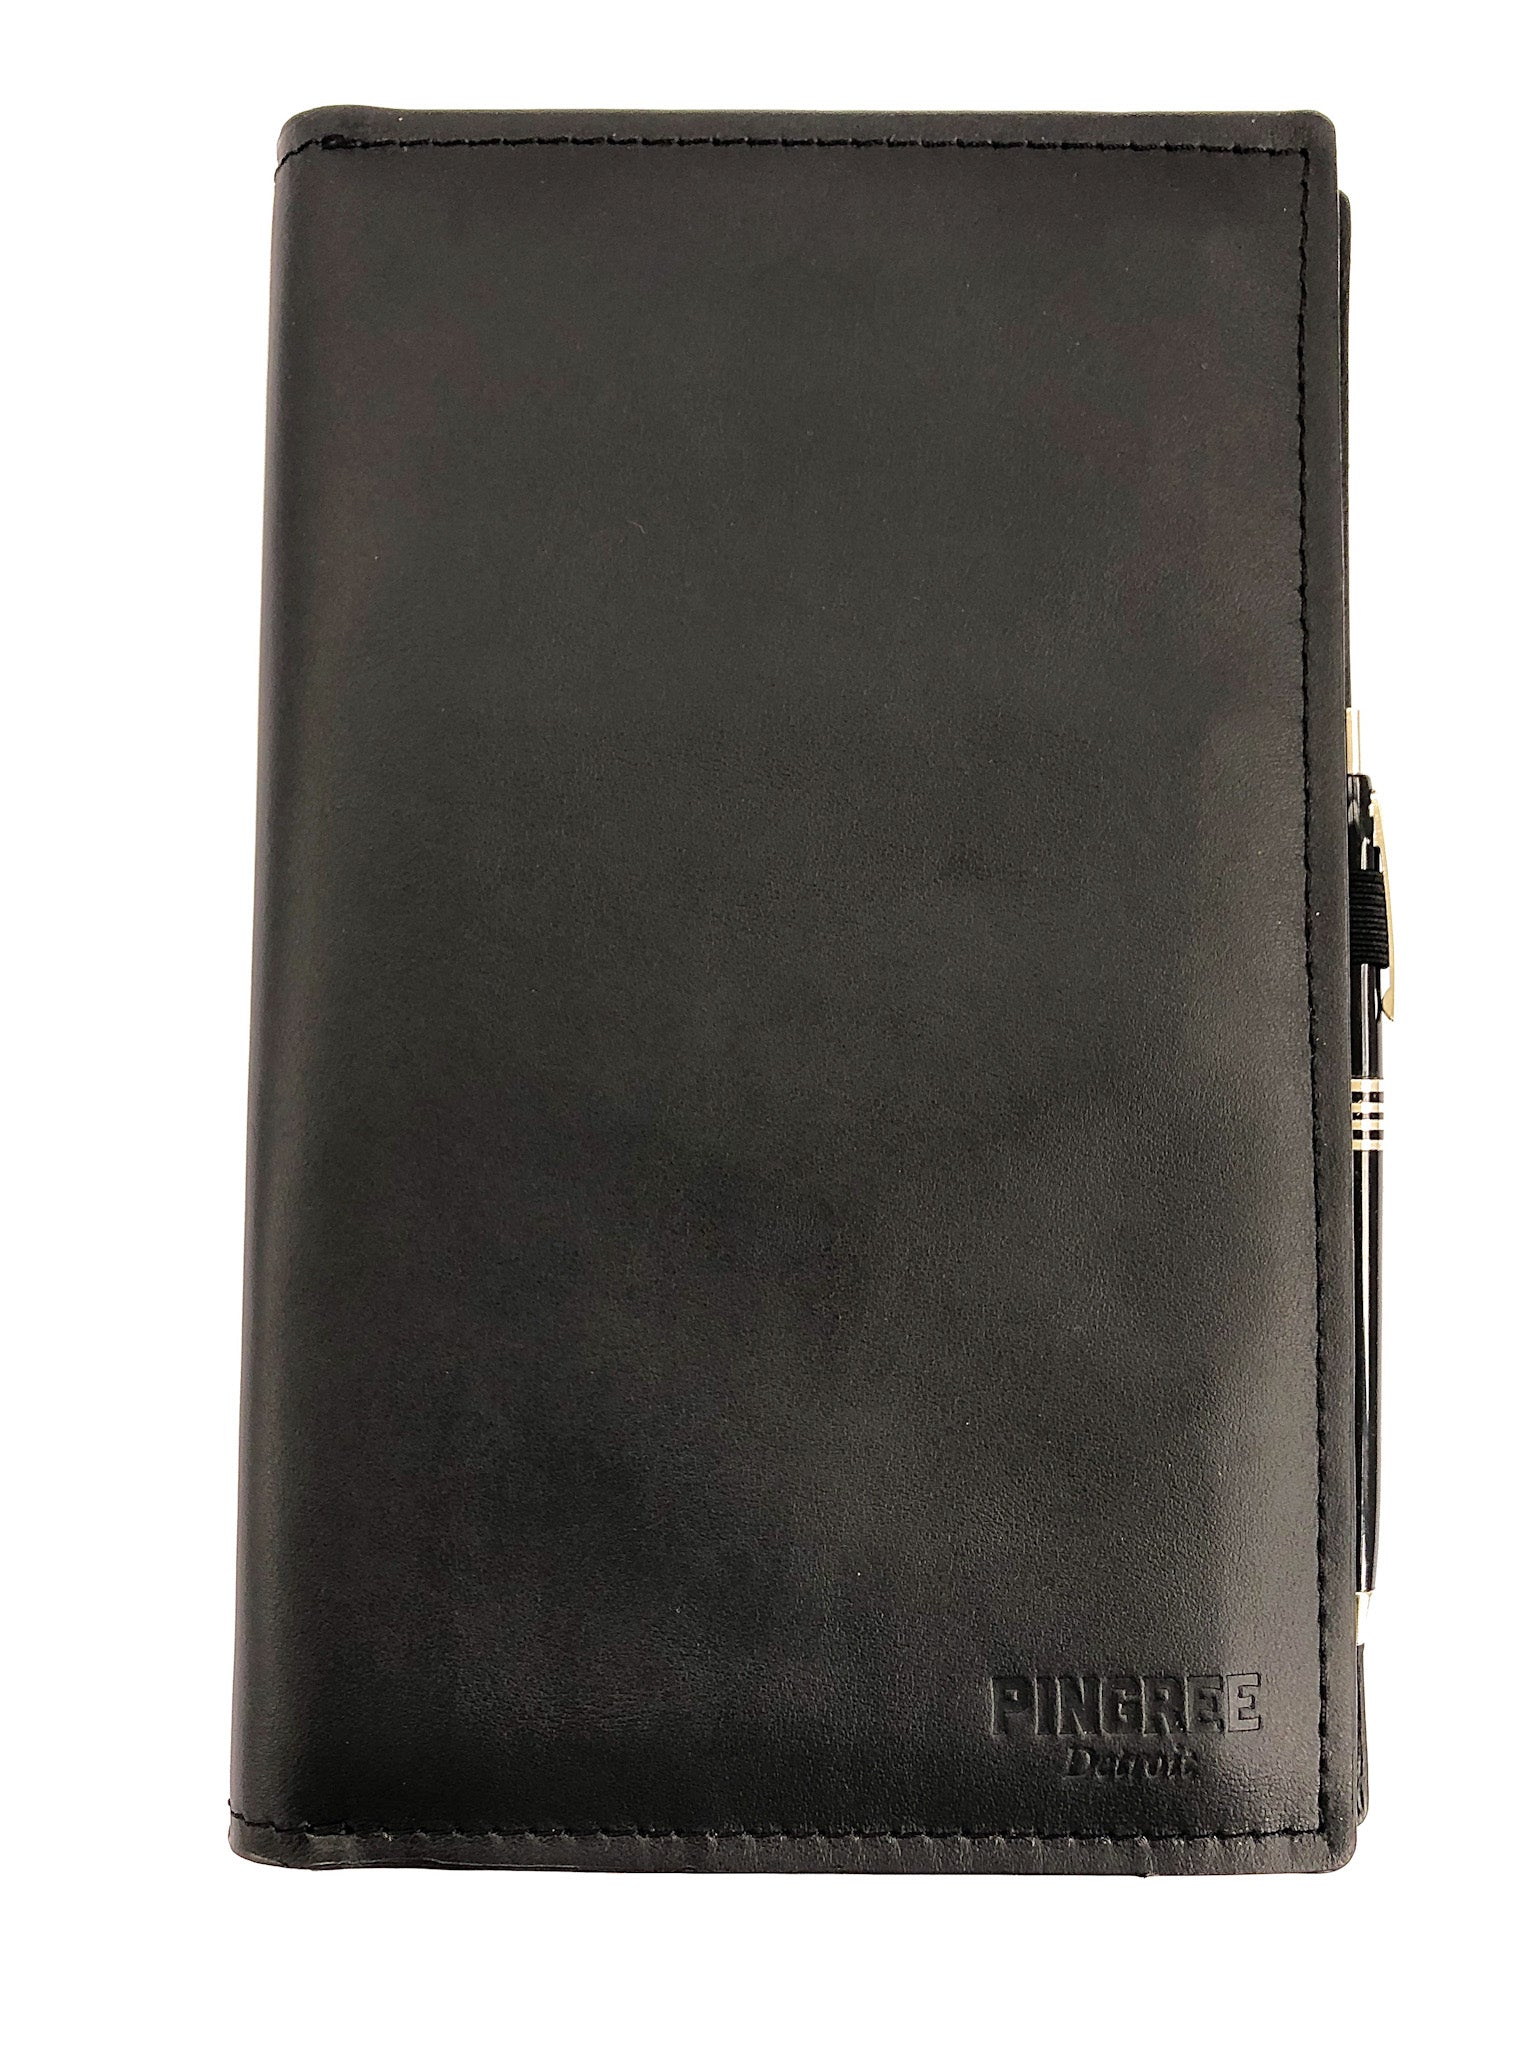 All black Pingree Moleskine Work Folio. Made in the USA from repurposed automotive leather. Smells like a new car because it nearly was.